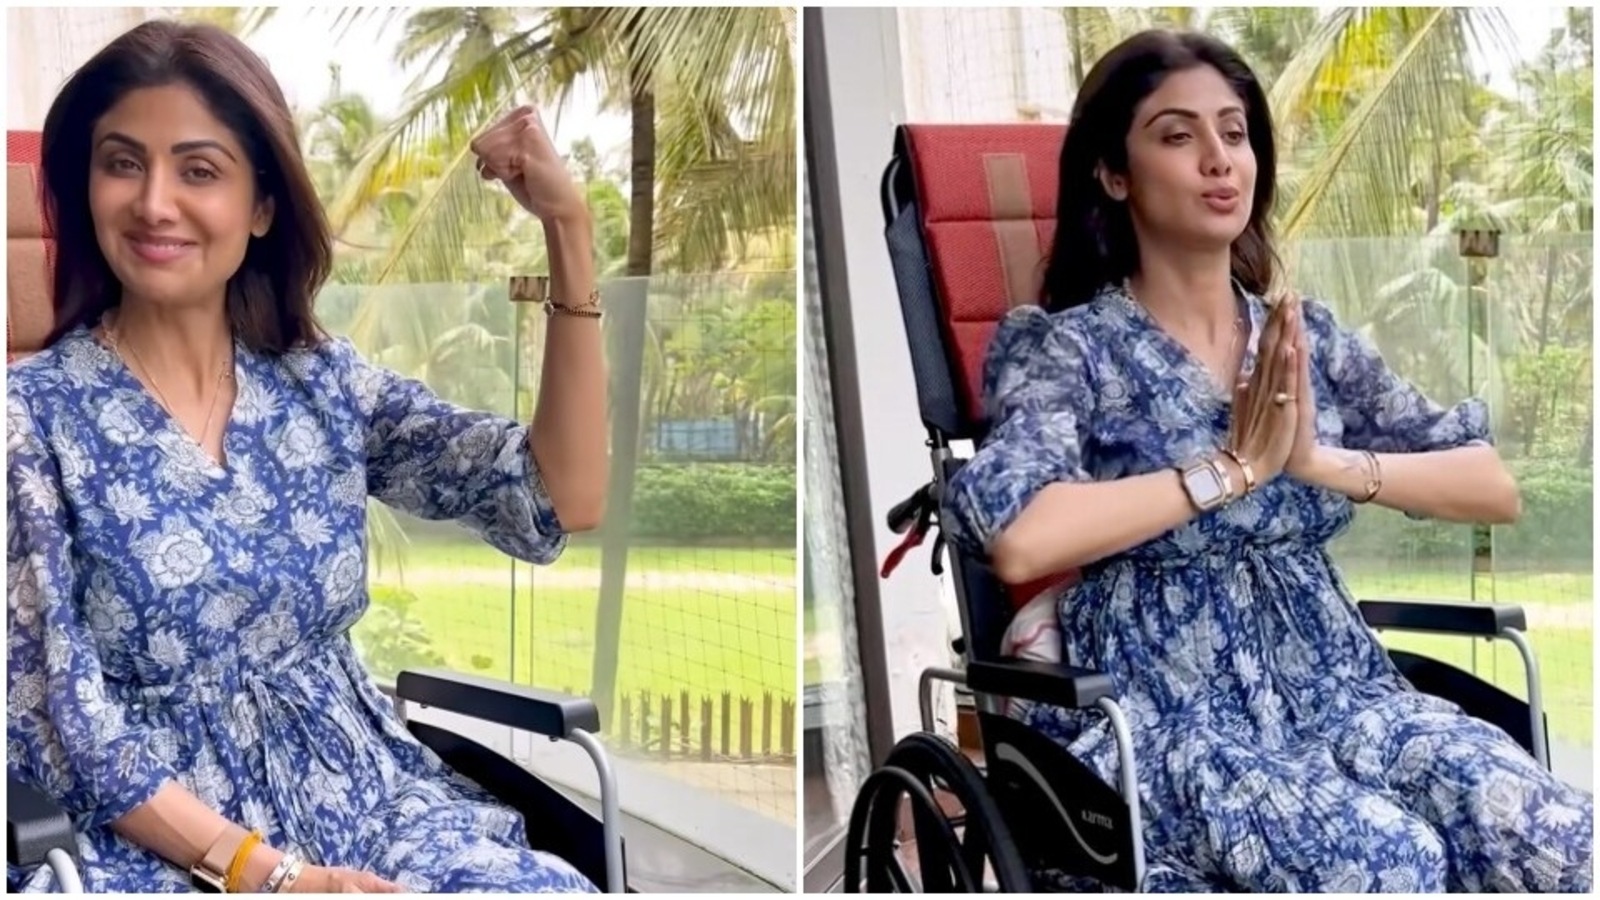 shilpa-shetty-says-pair-toota-hai-himmat-nahi-practices-yoga-stretches-in-a-wheelchair-for-people-with-knee-back-pain